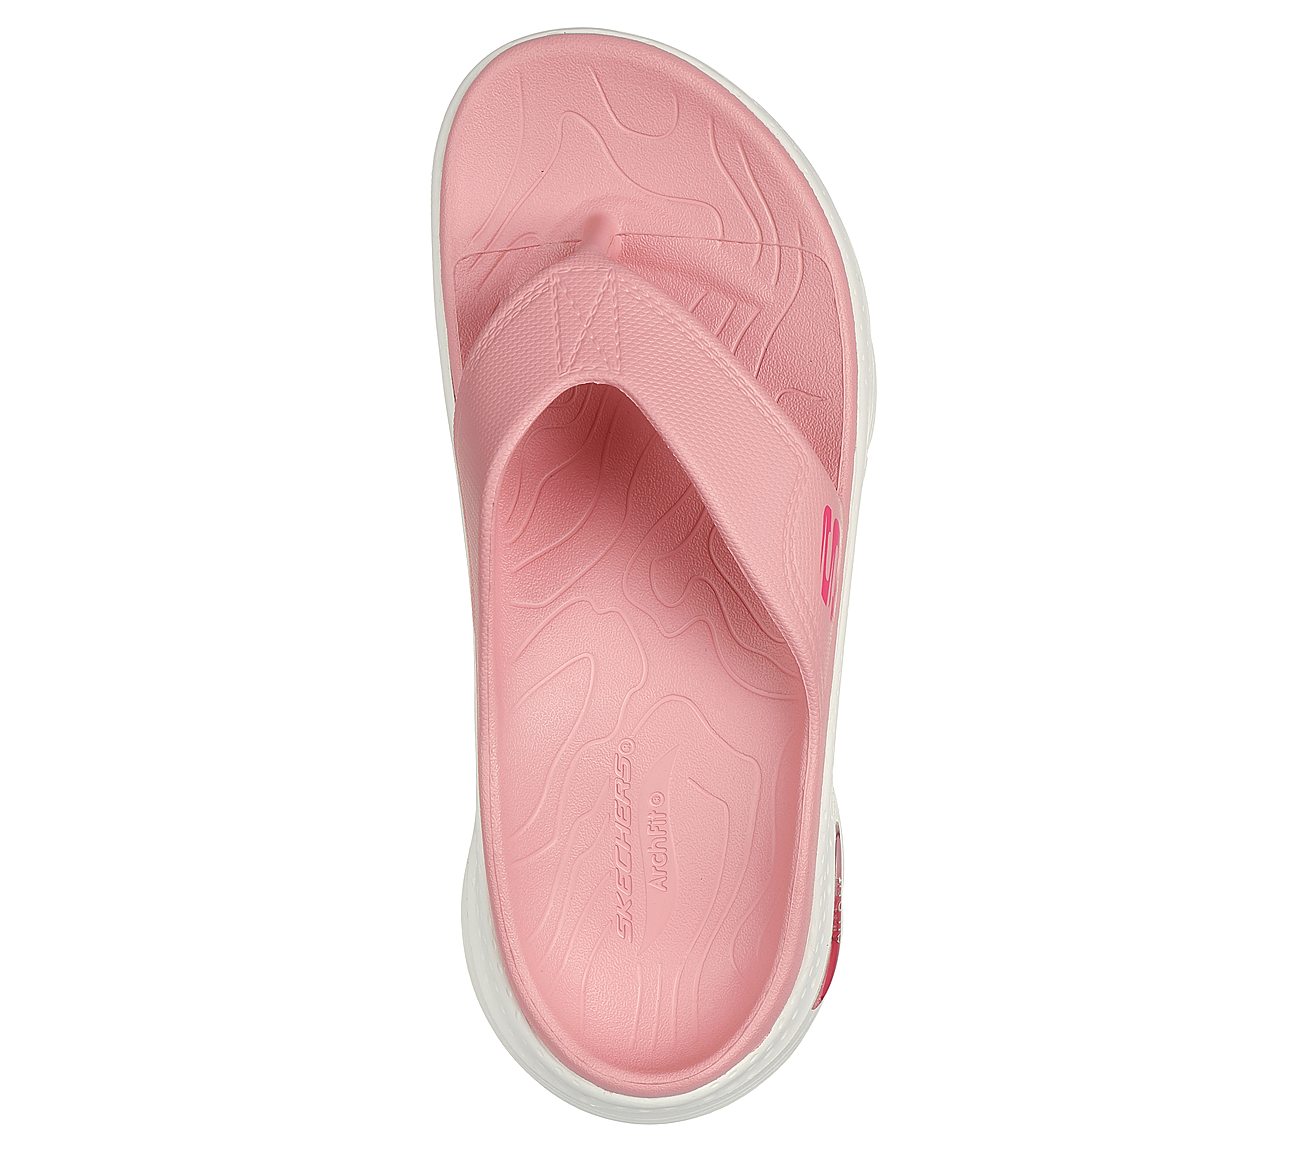 ARCH FIT FOAMIES - LIFESTYLE, LLLIGHT PINK Footwear Top View